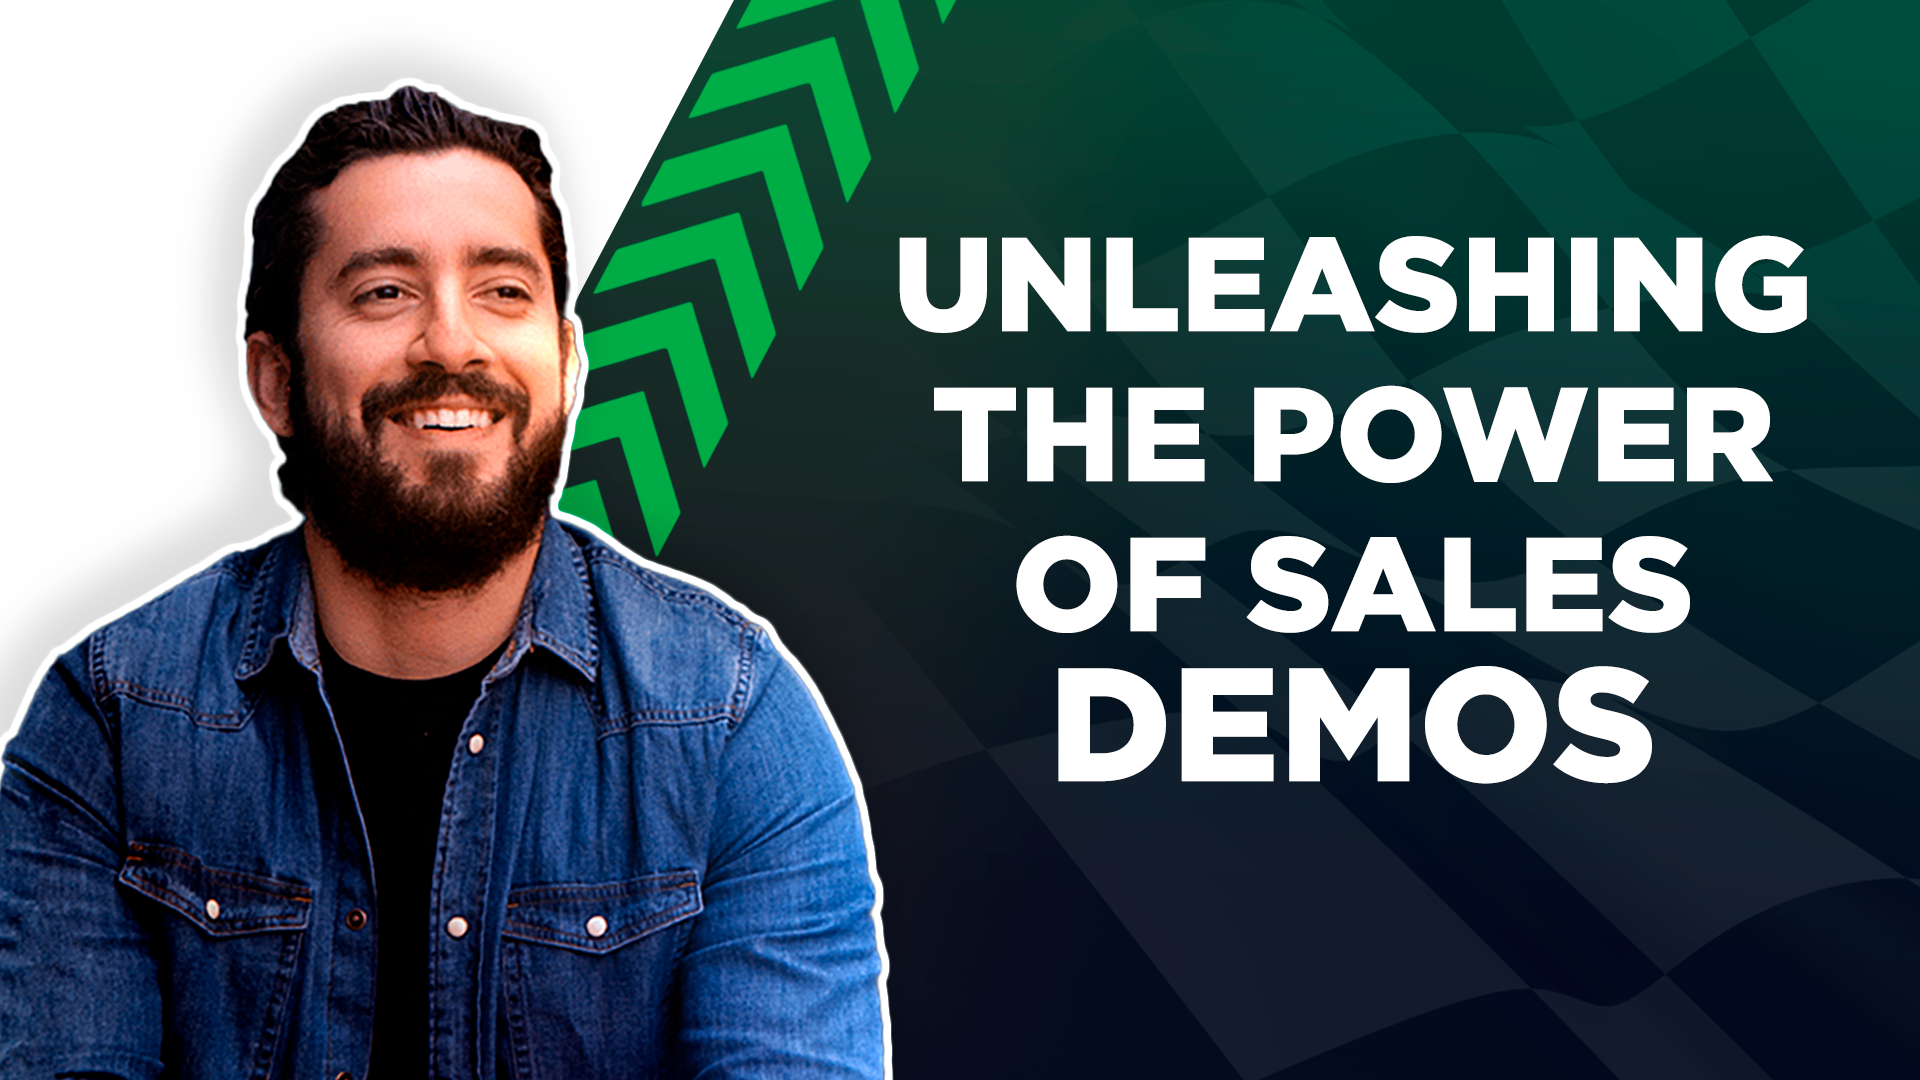 Podcast Pit Stop: Mor Assouline on Unleashing the Power of Sales Demos